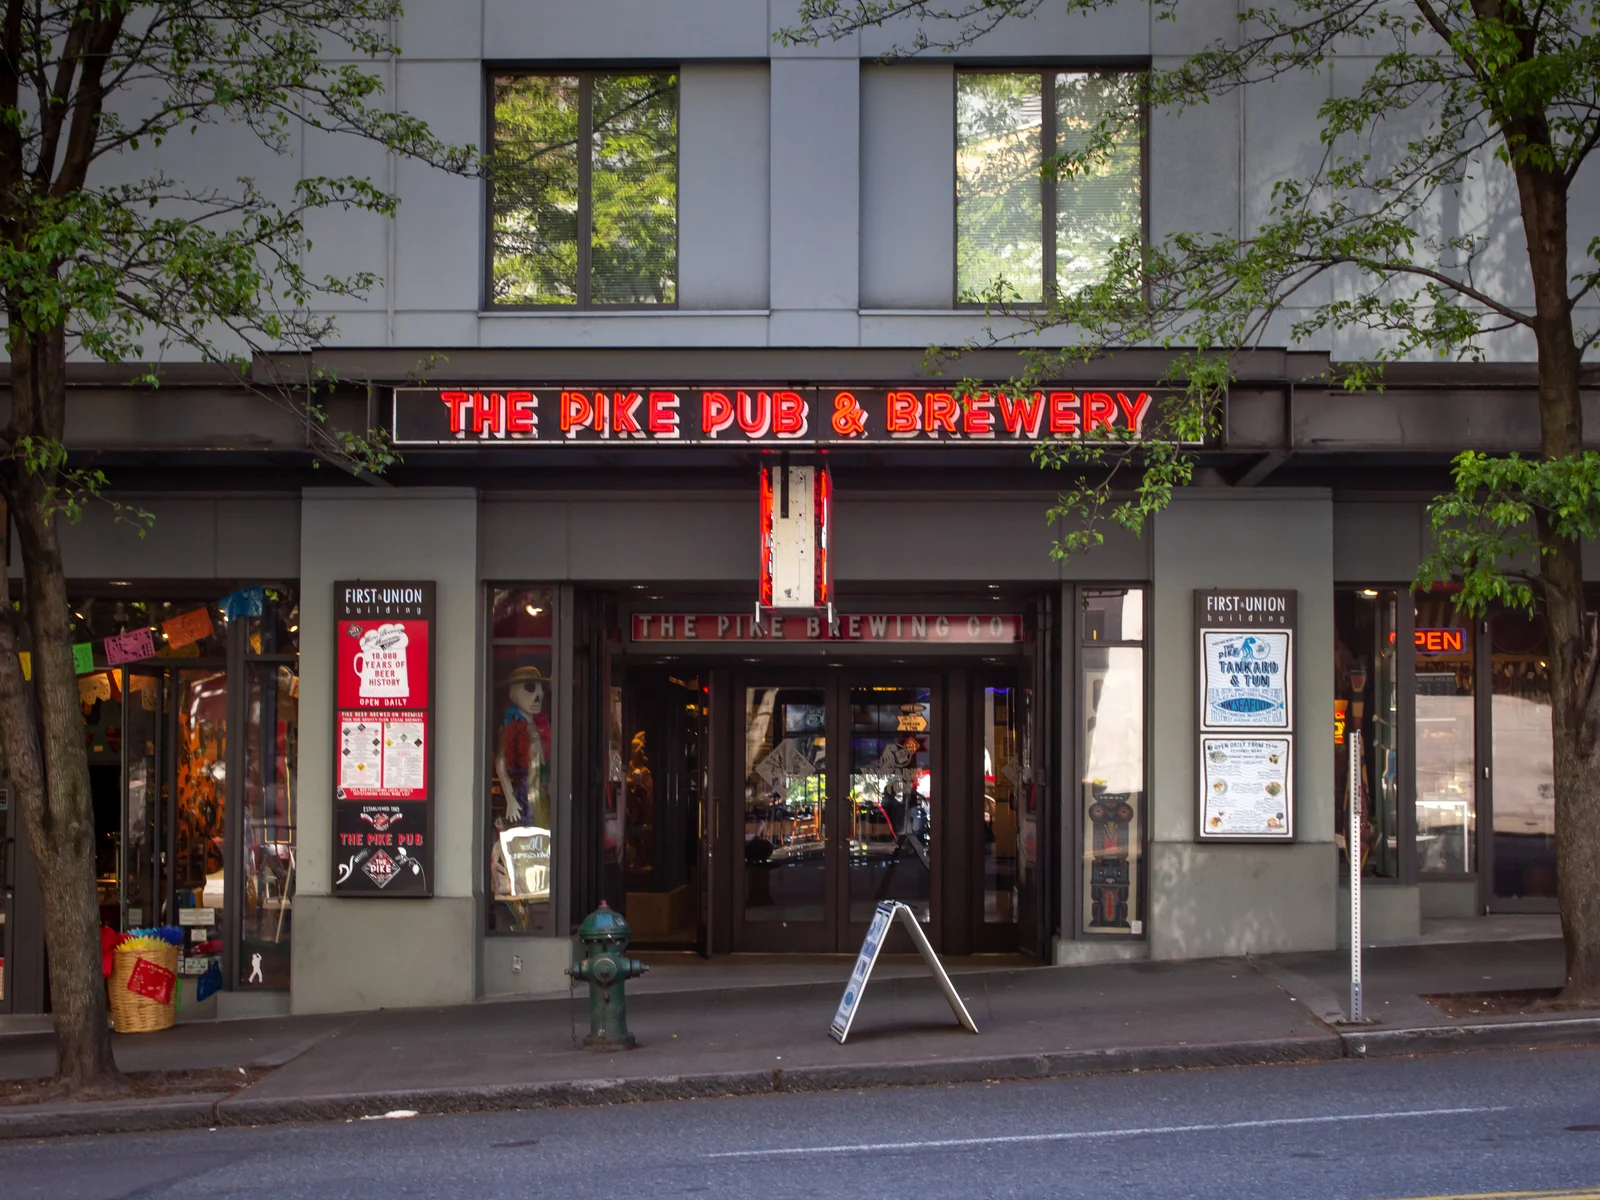 The Pike Pub and Brewery photographed from the street is one of the most visited brewery and one of the best things to do in Washington, D.C.